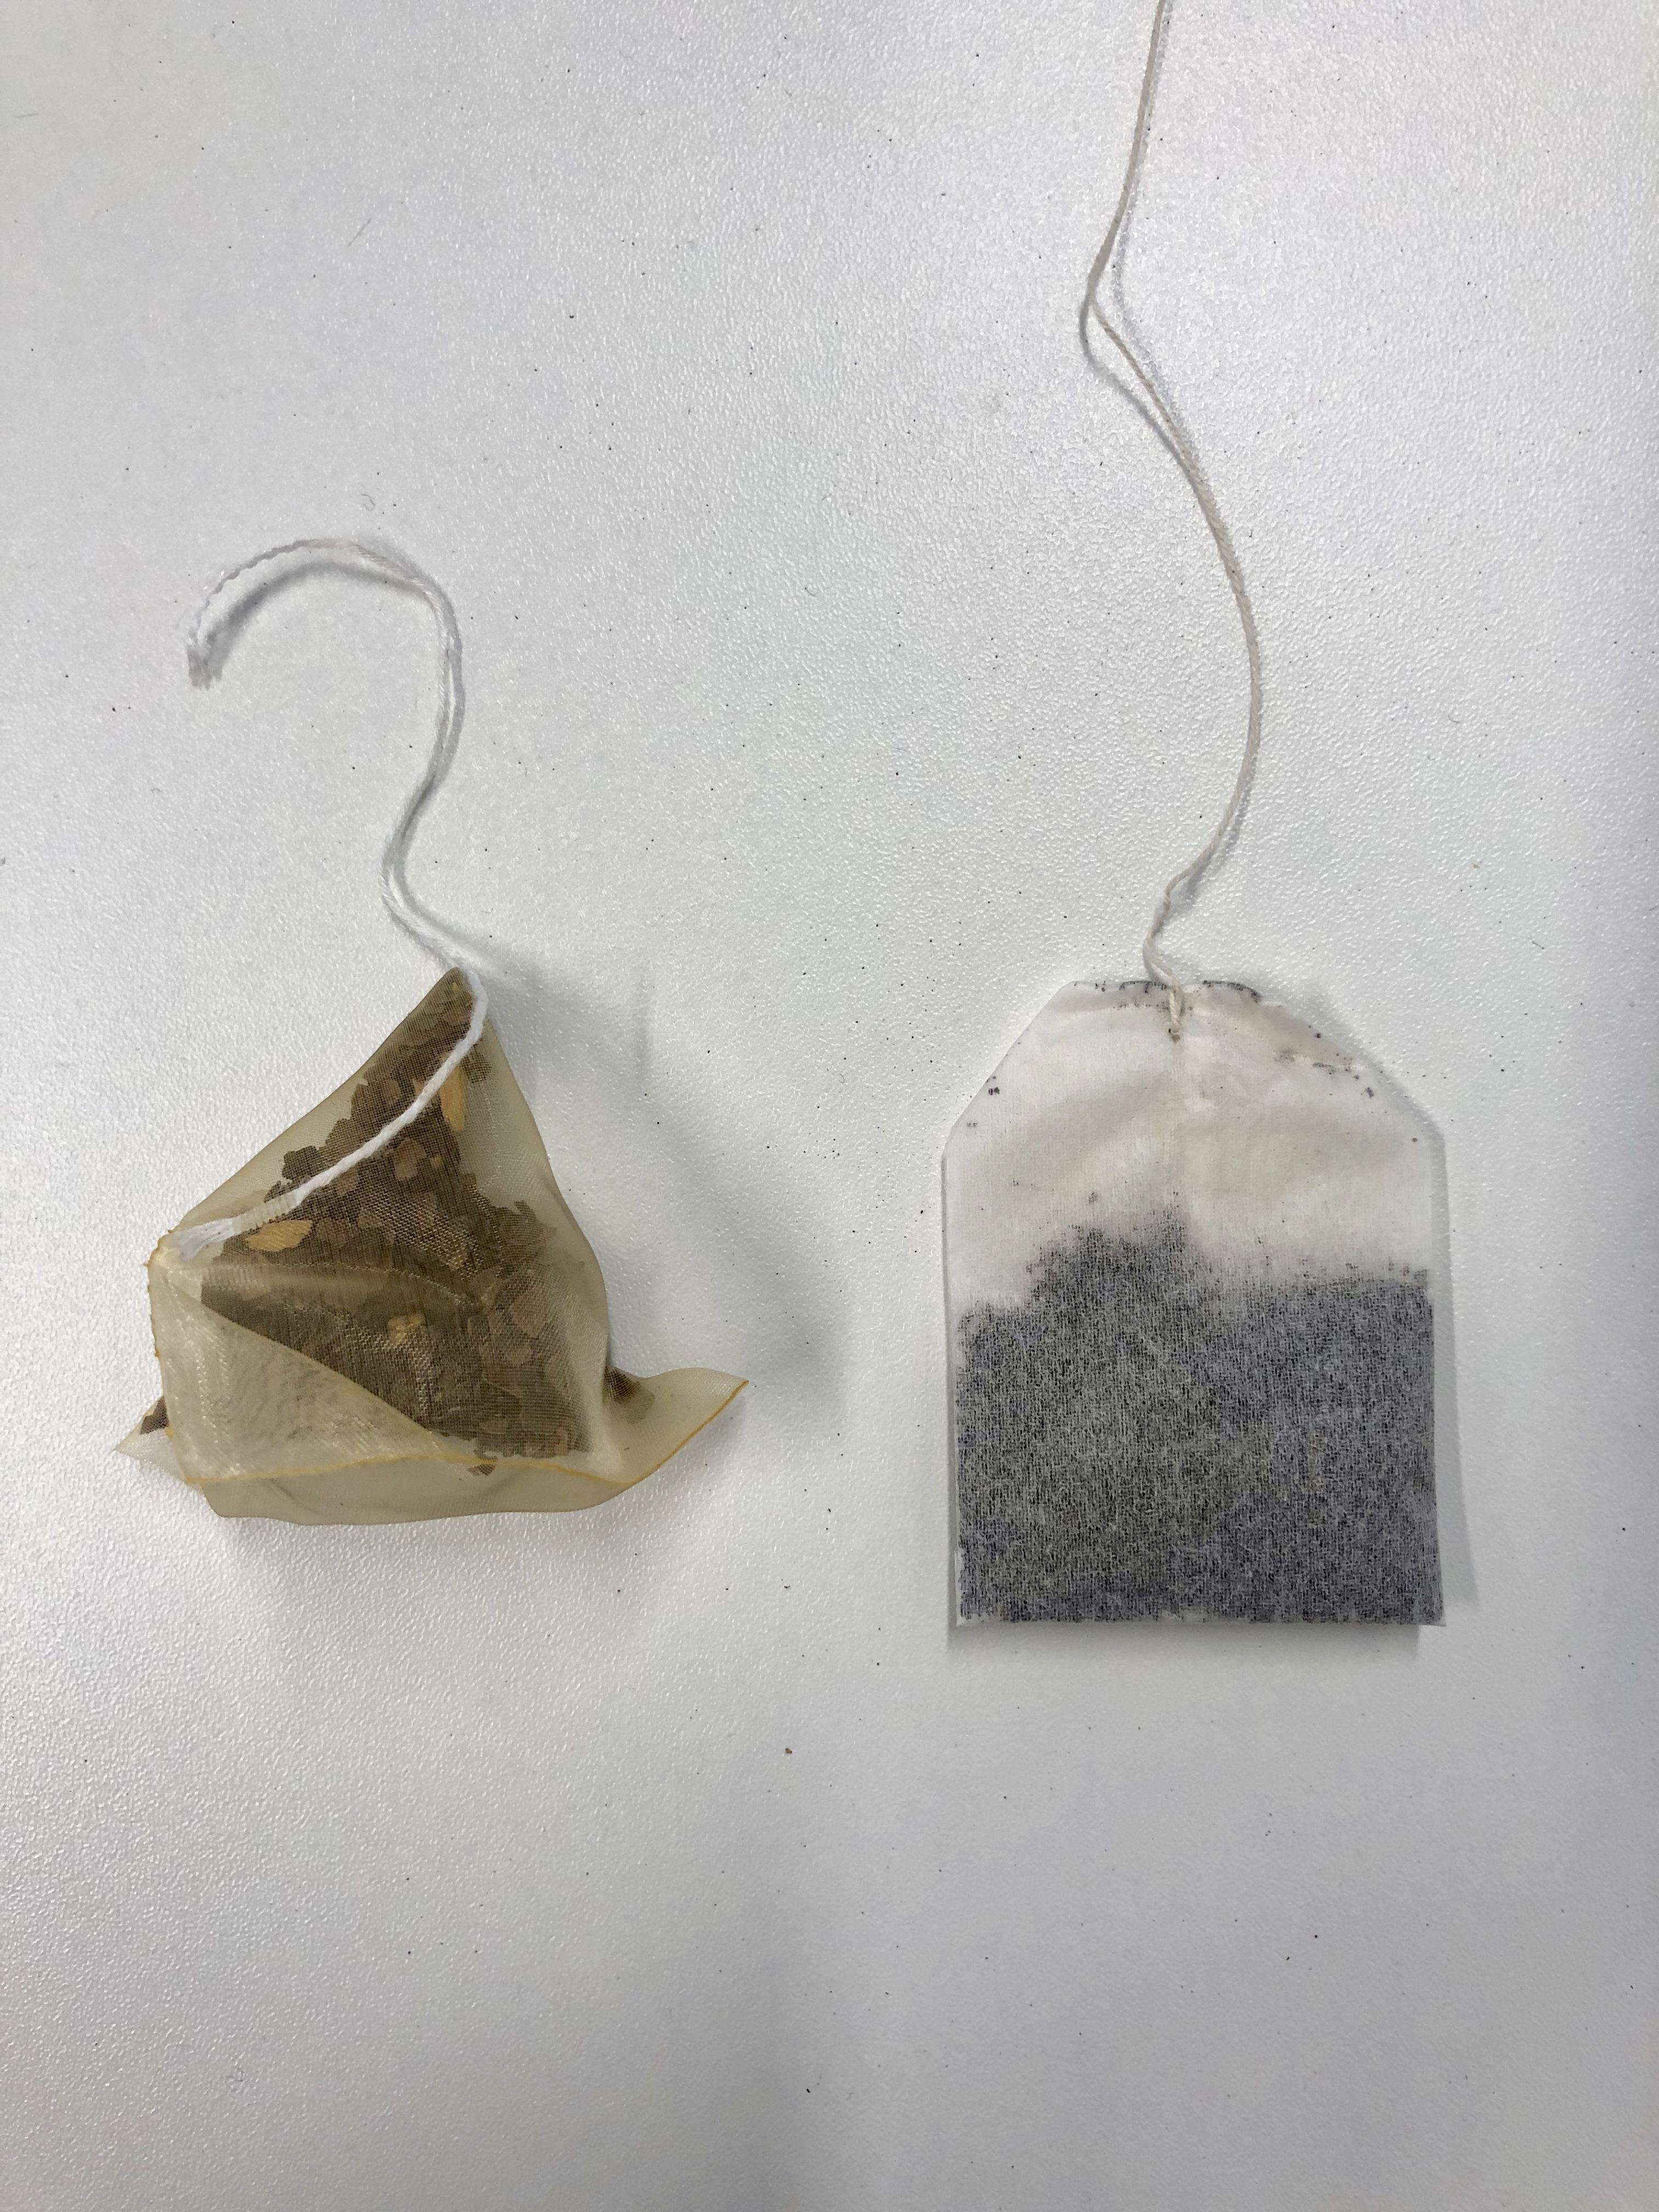 Tea Bags & 9 Other Sneaky Sources of Plastic